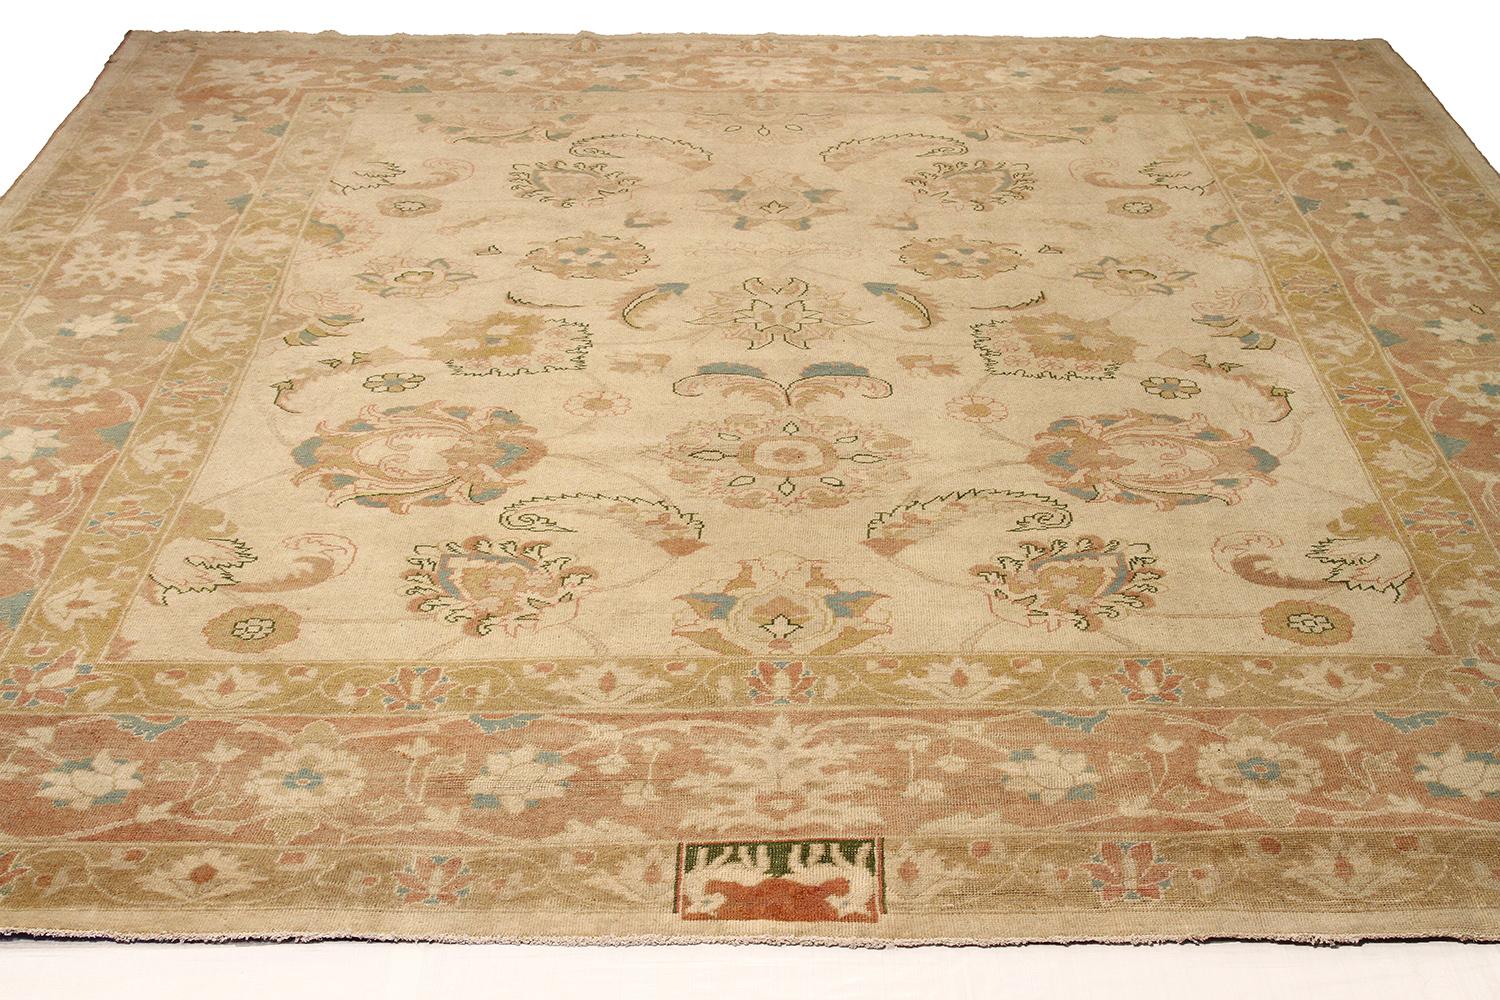 New handmade Turkish area rug from high-quality sheep’s wool and colored with eco-friendly vegetable dyes that are proven safe for humans and pets alike. It’s a traditional Sultanabad design showcasing a regal ivory field with prominent Herati